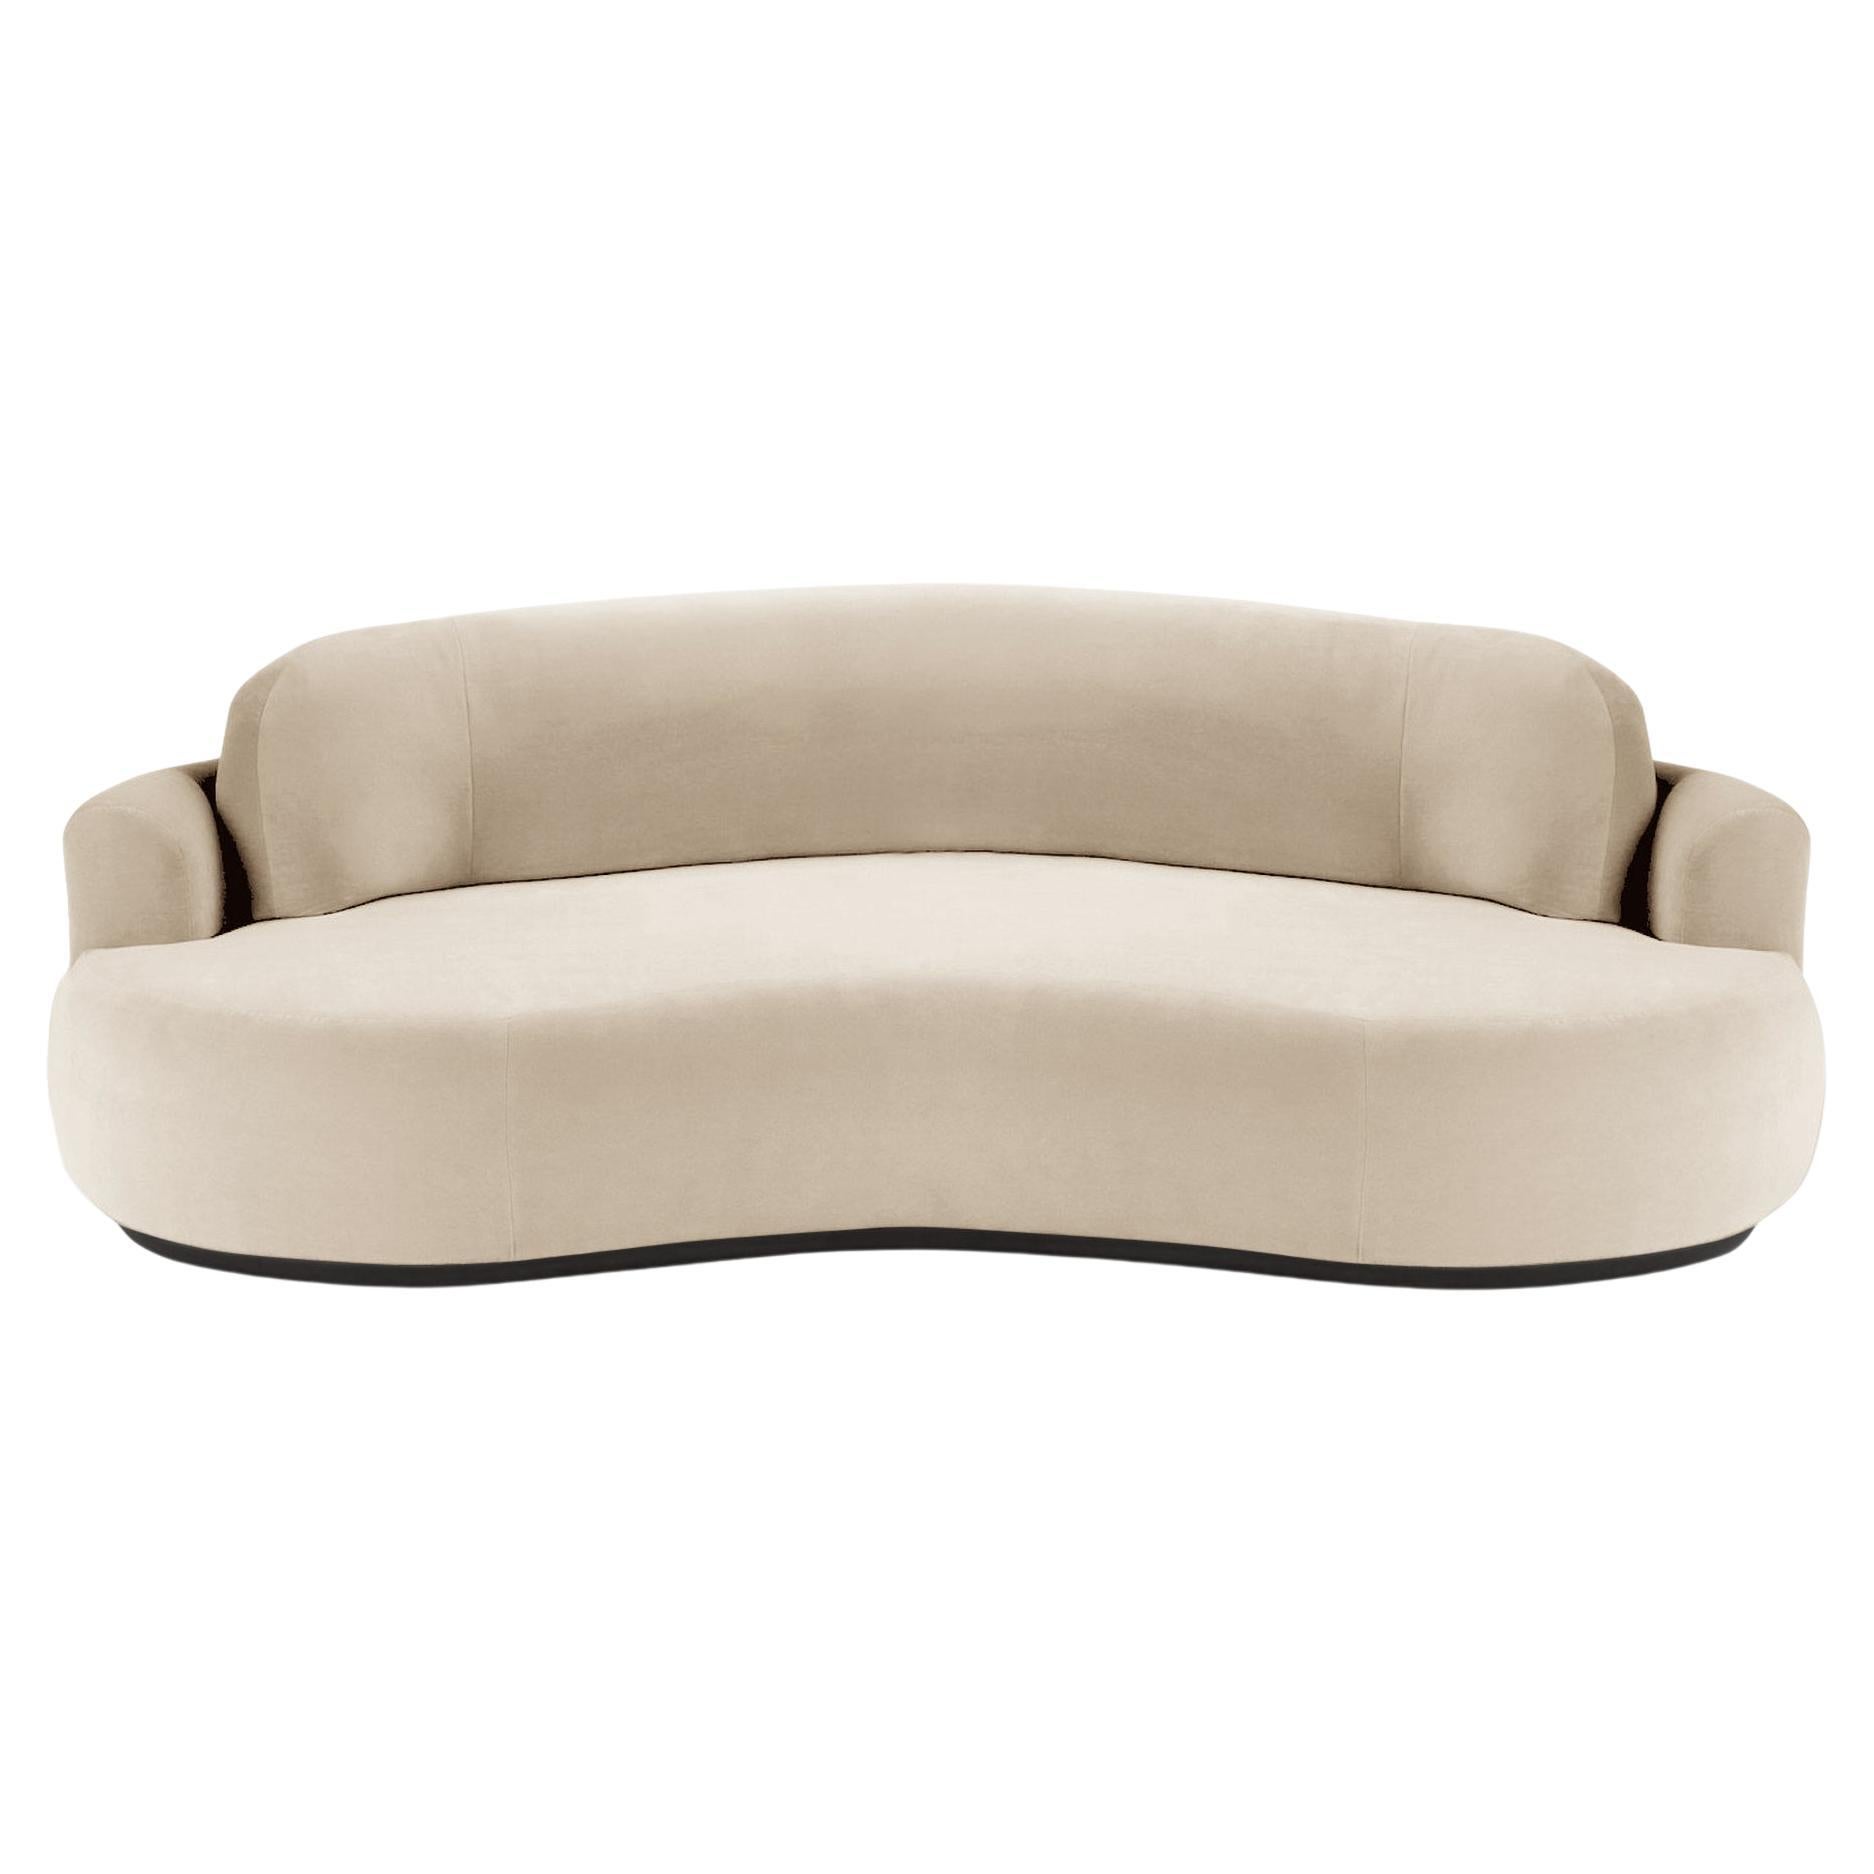 Naked Round Sofa, Medium with Beech Ash-056-5 and Boucle Snow